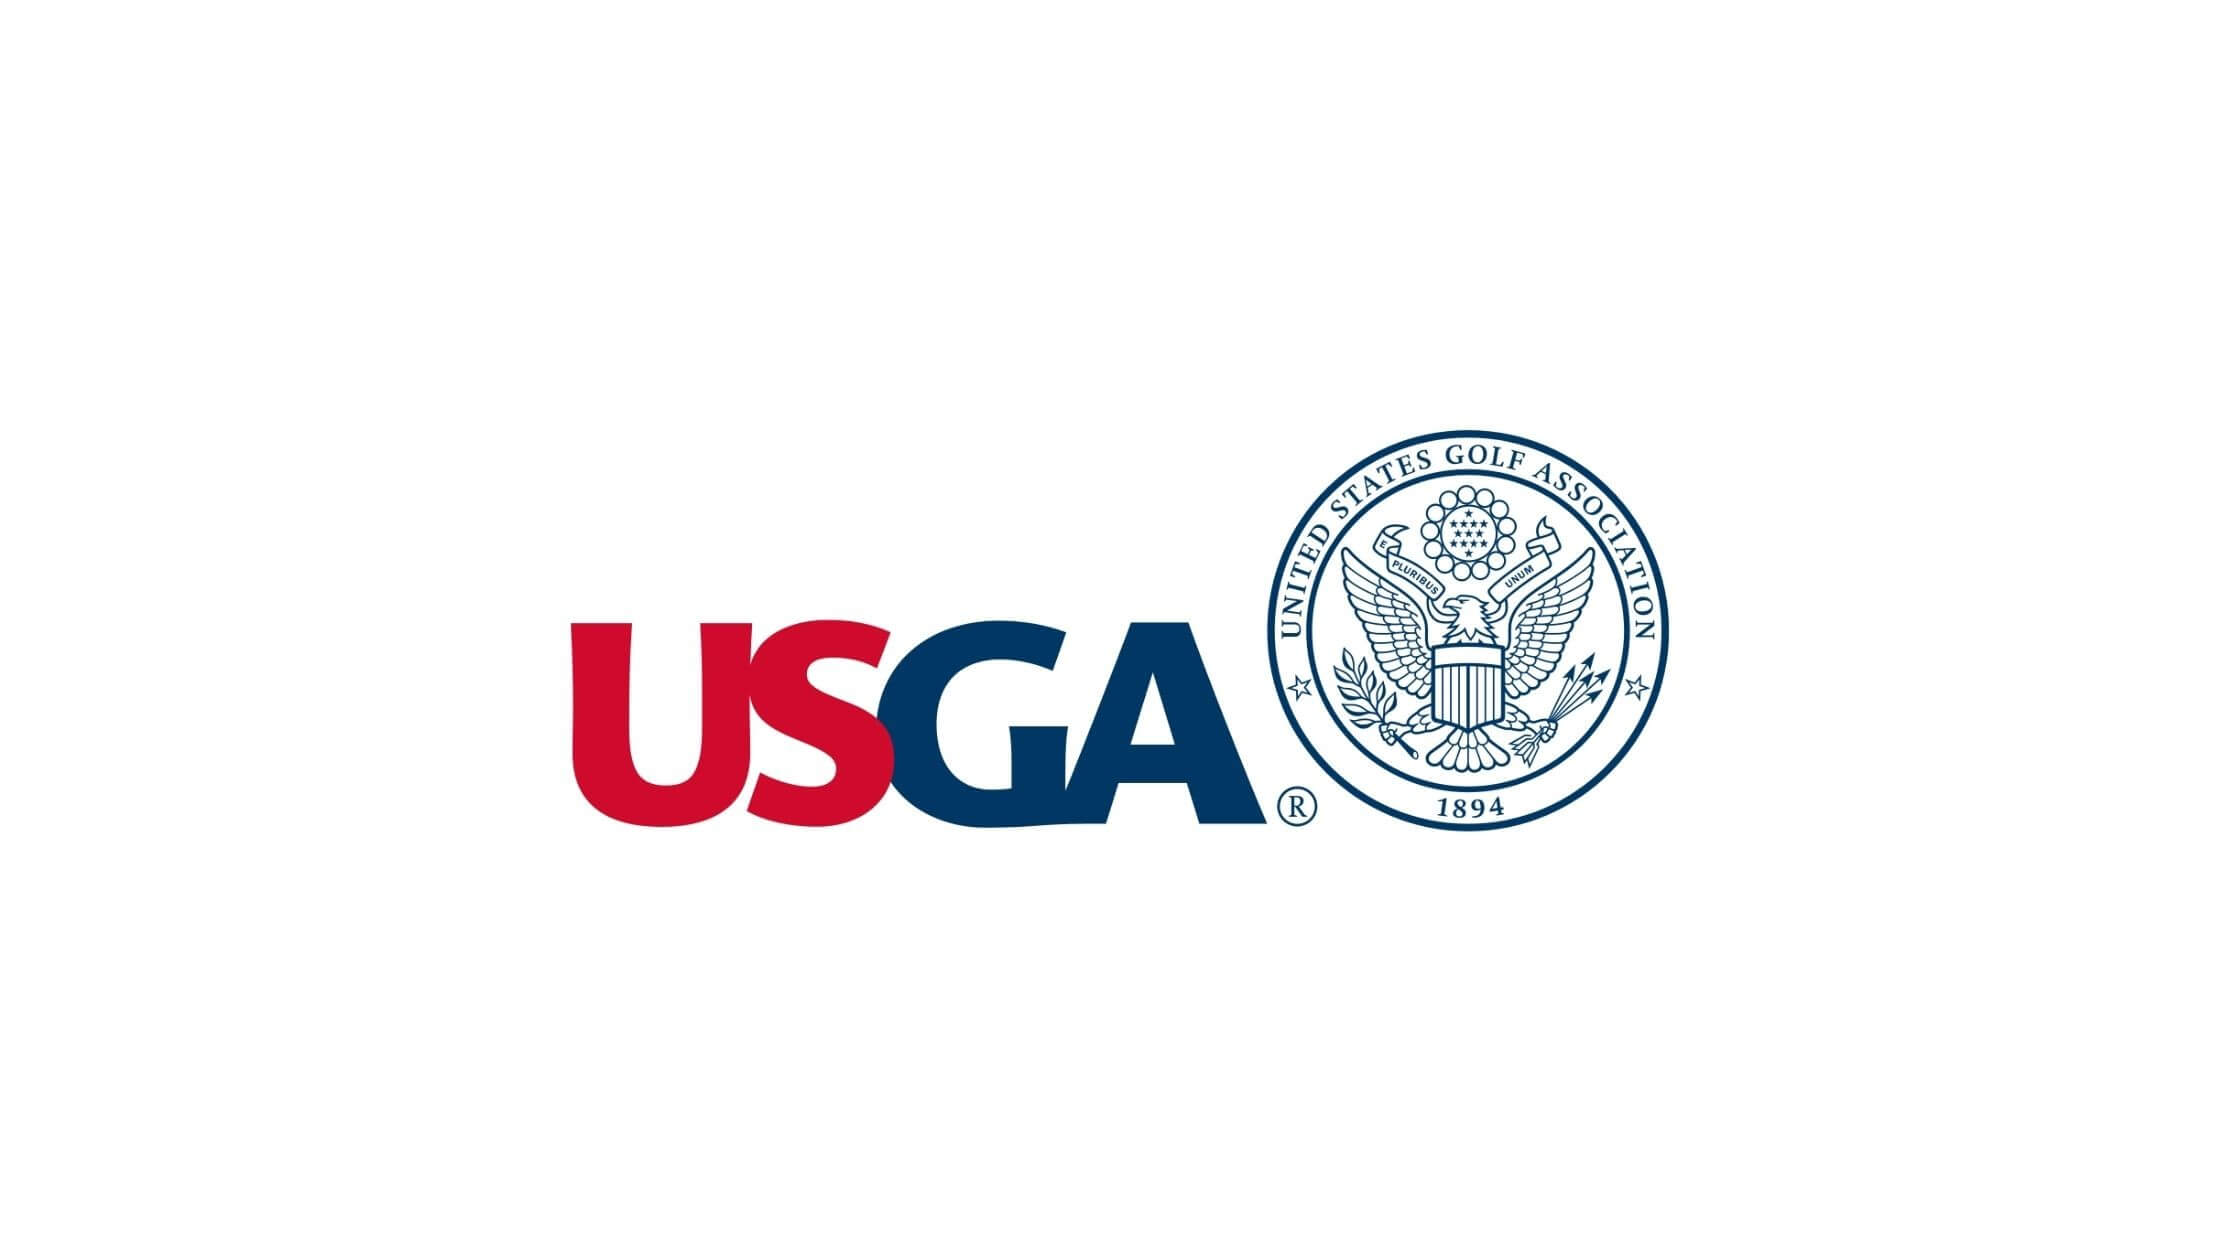 MIKE WHAN TO BECOME CEO OF THE UNITED STATES GOLF ASSOCIATION